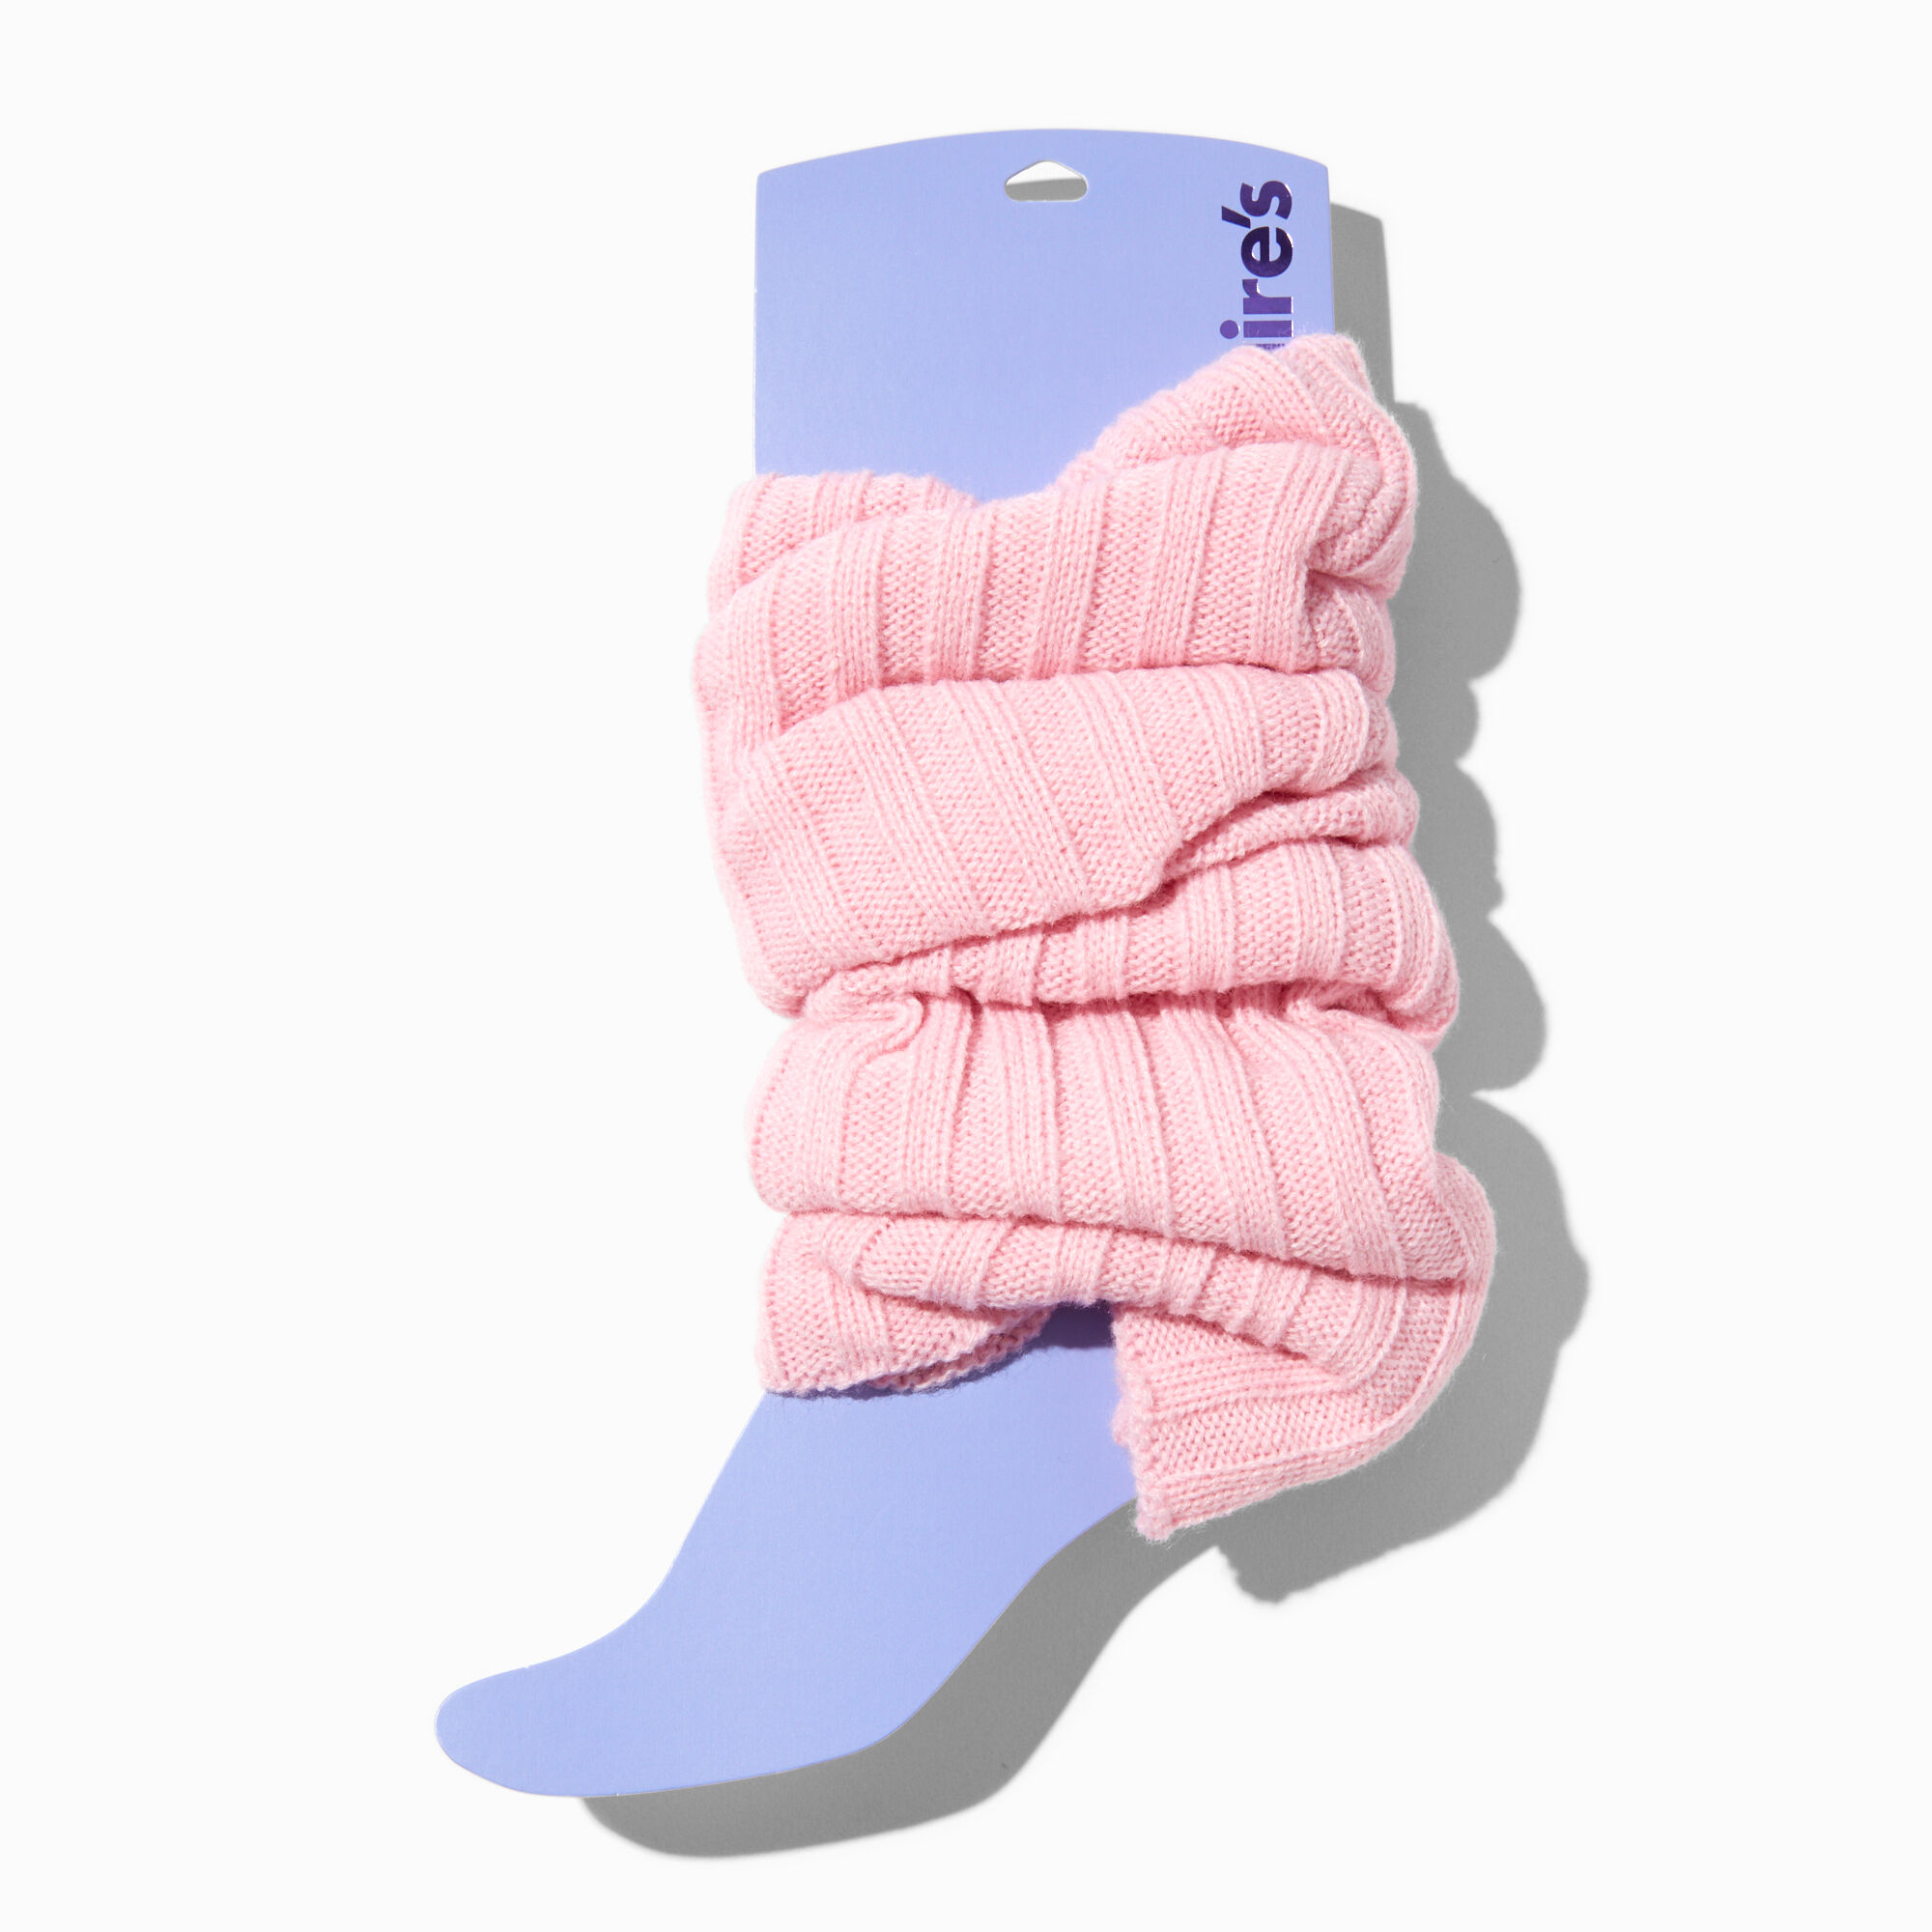 View Claires Blush Sweater Knit Leg Warmers Pink information